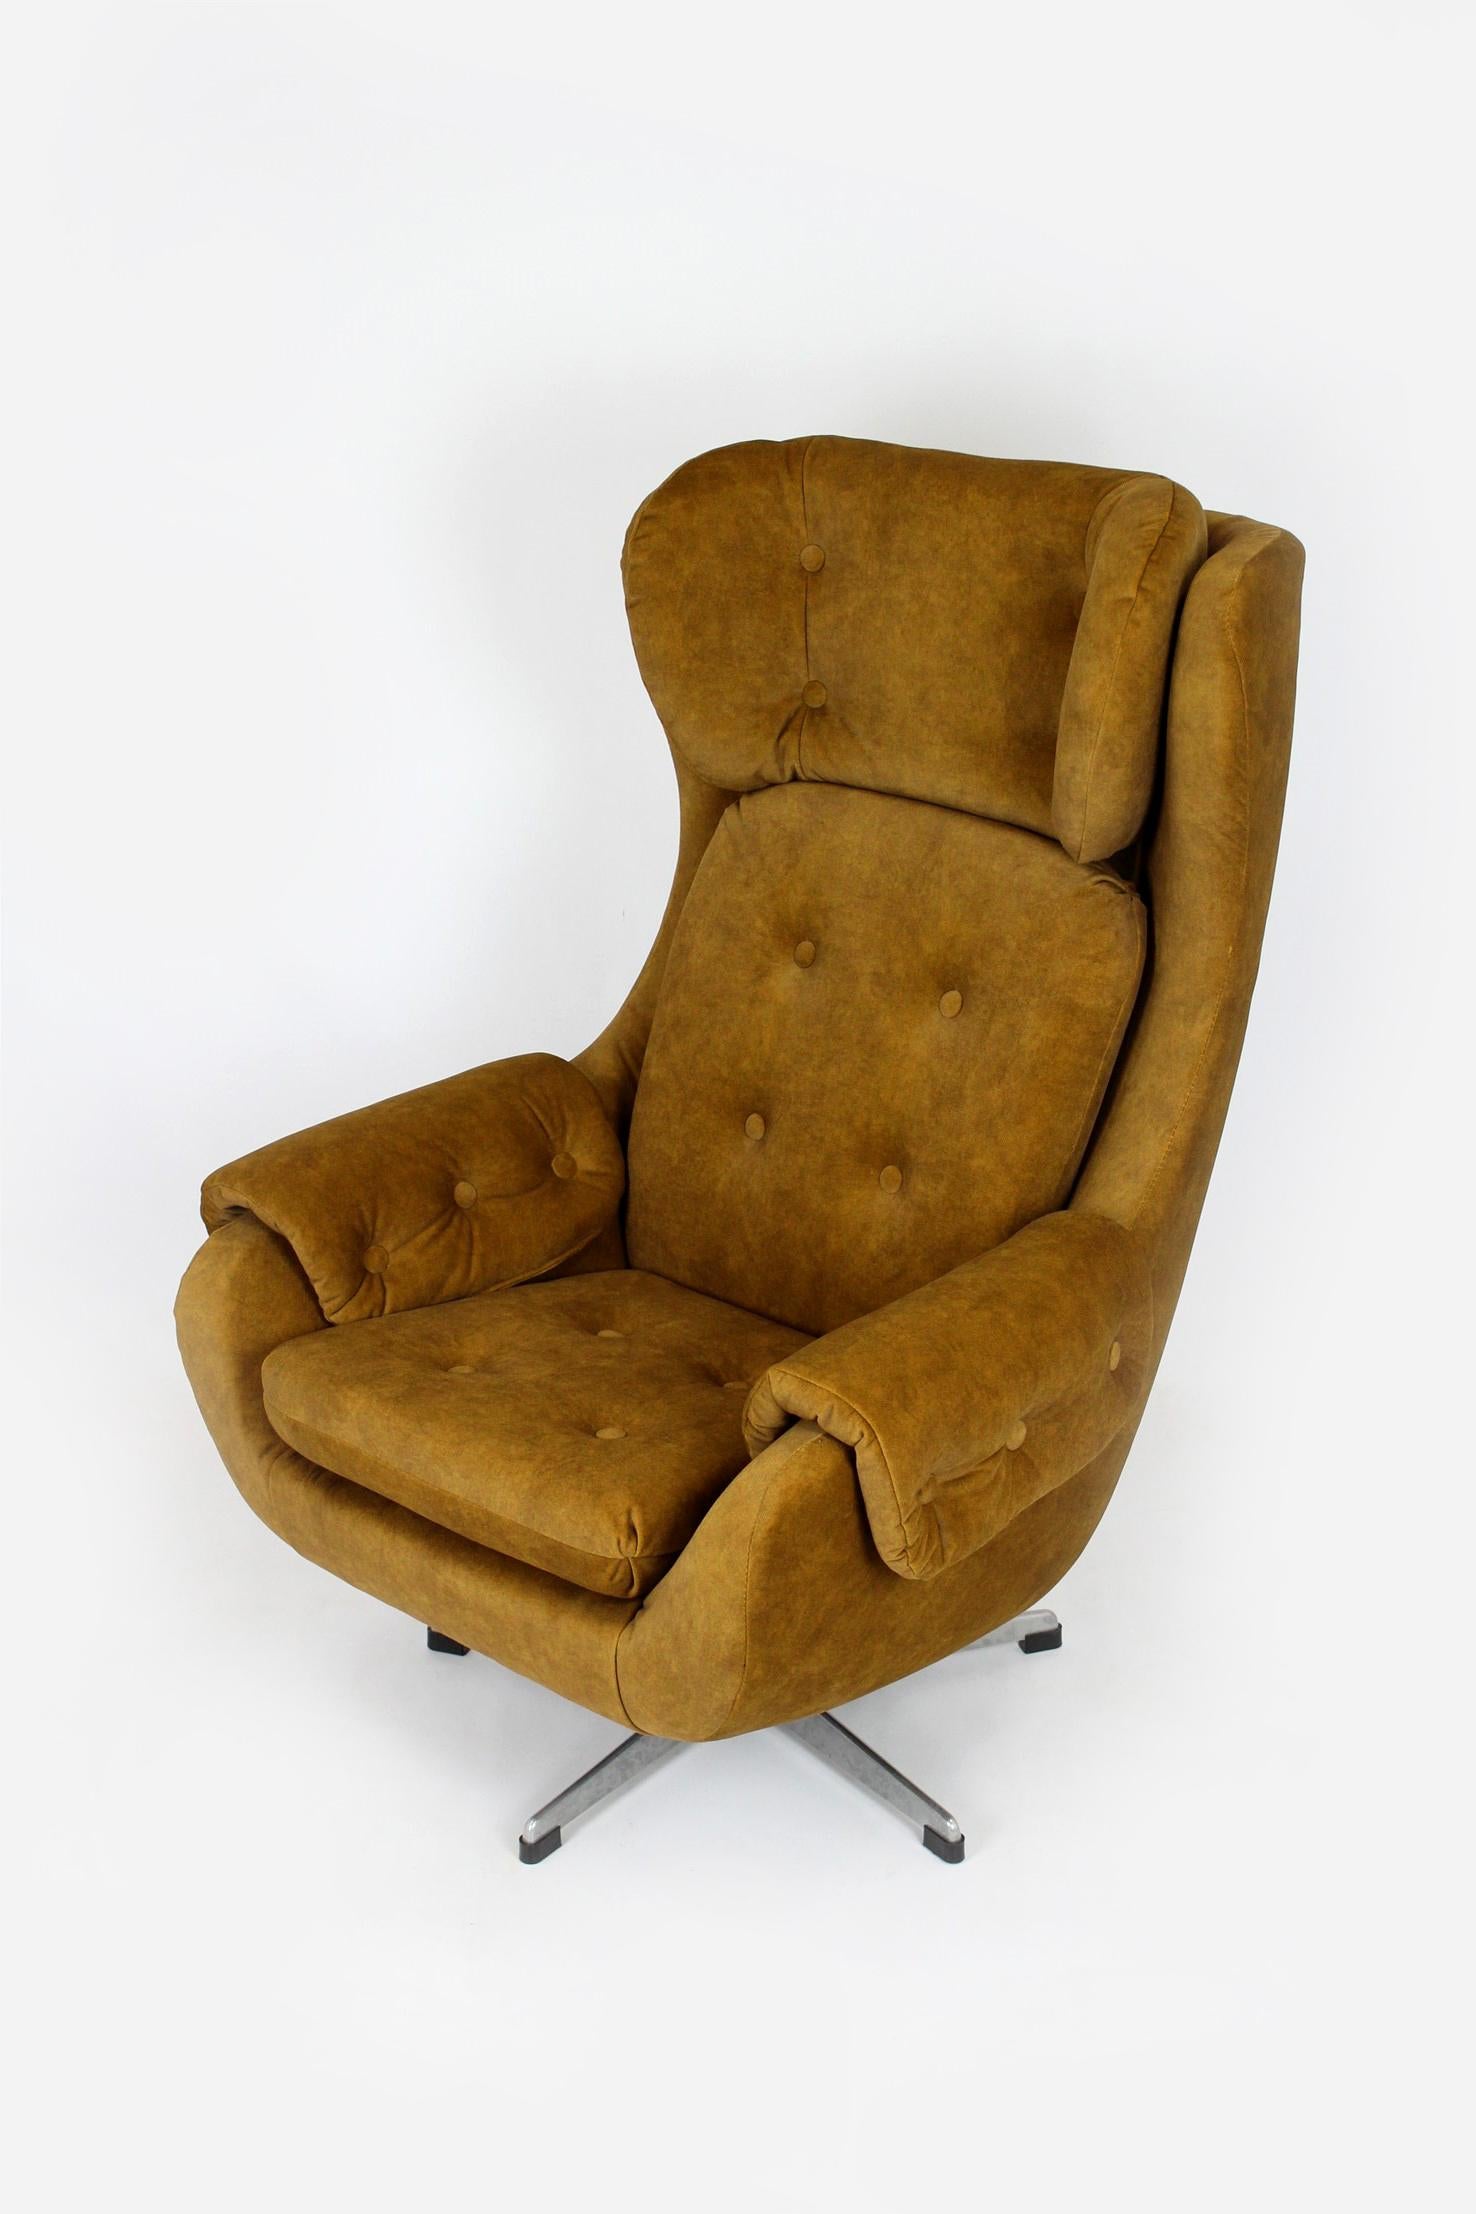 Fabric Reupholstered Swivel Lounge Chair from Up Zavody, Czechia, 1970s For Sale